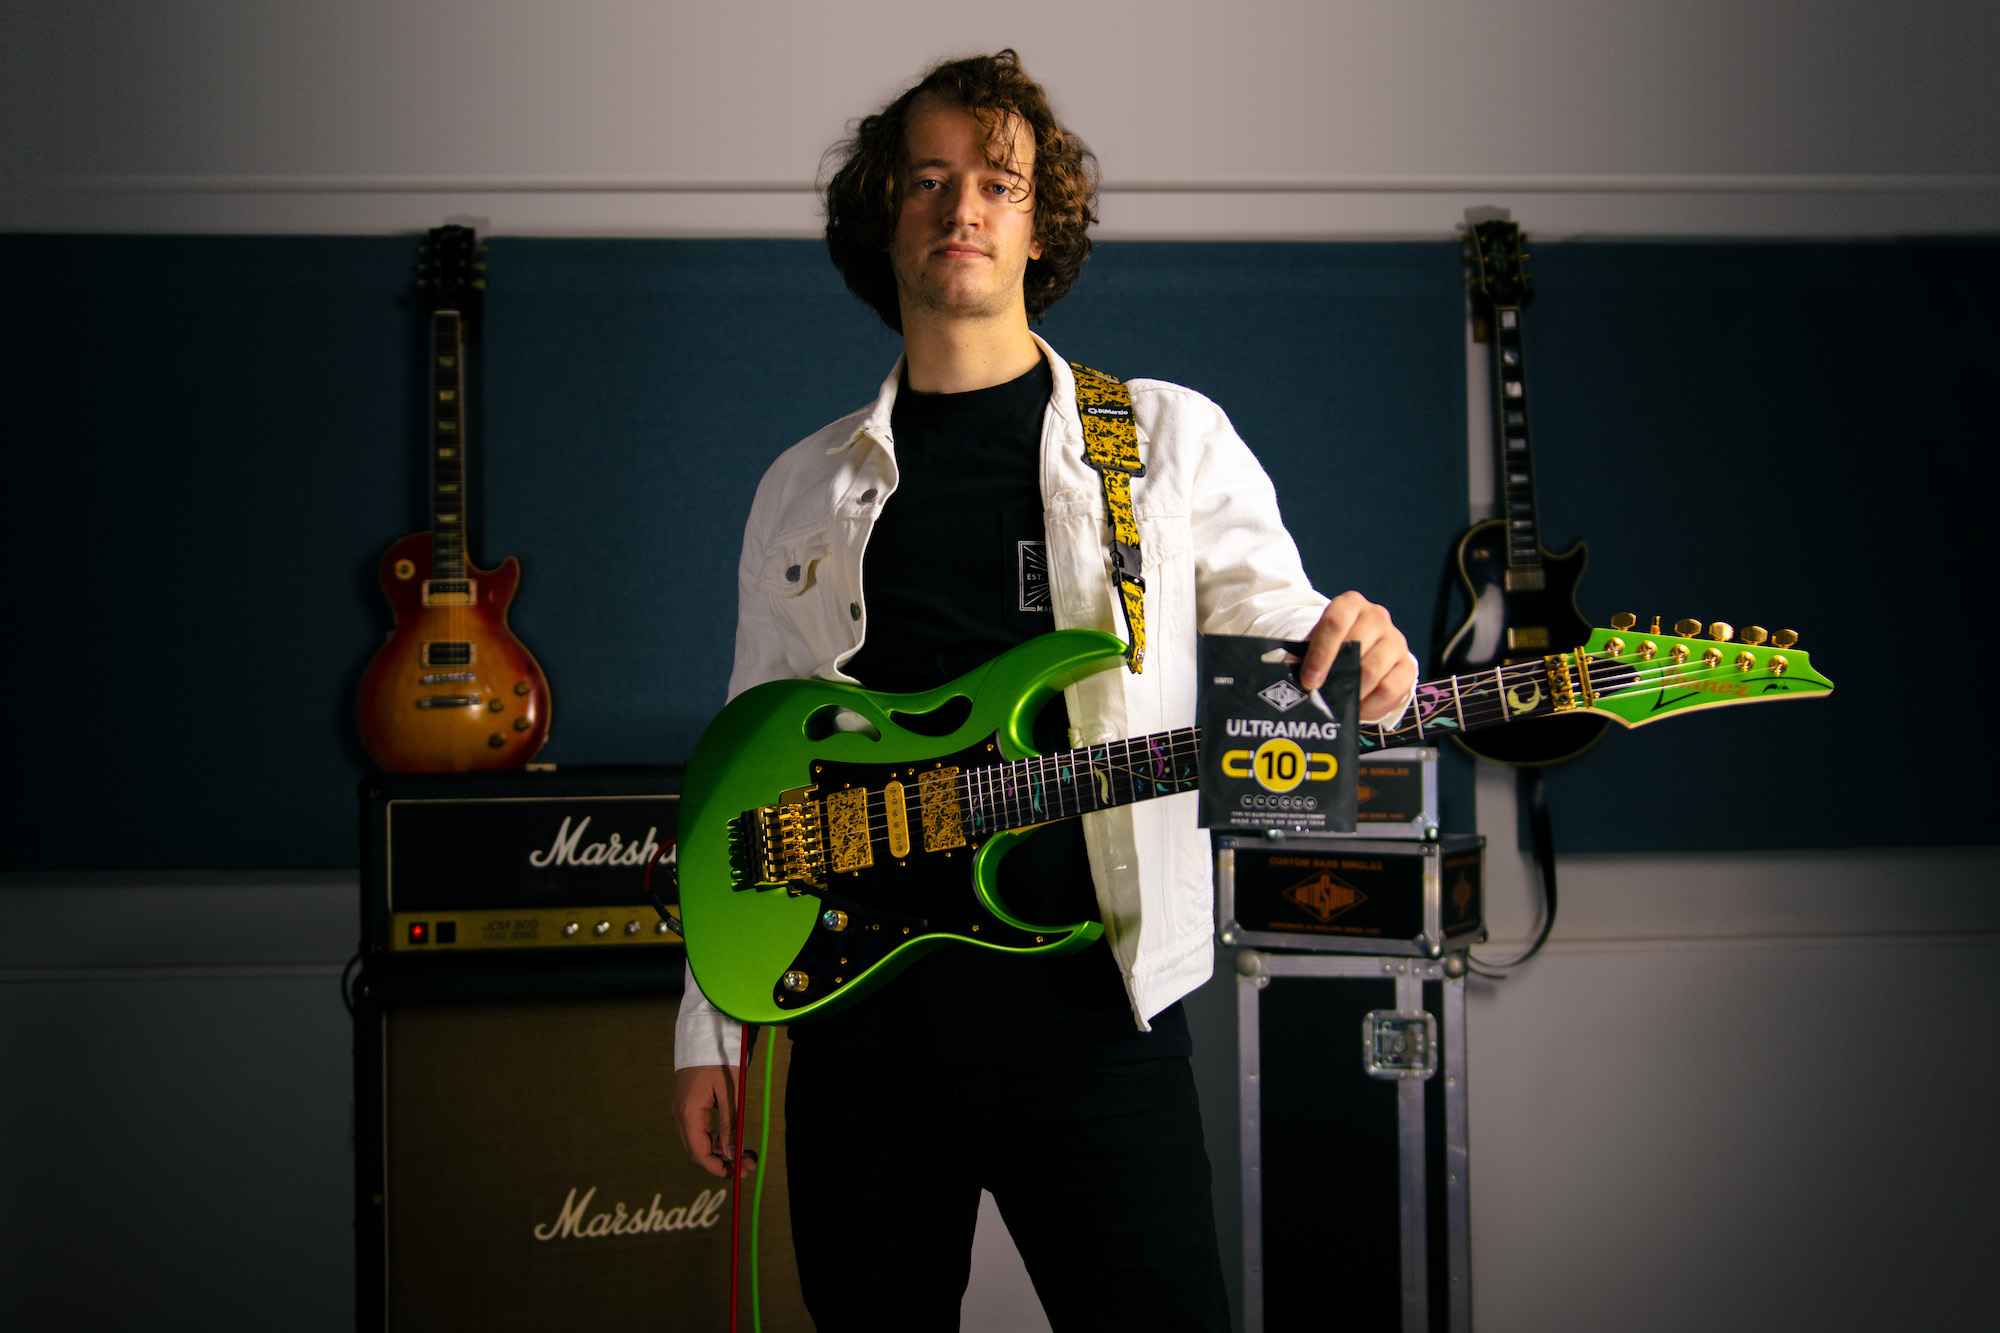 James Ford guitarist with Ibanez Pia guitar in green for Rotosound music strings. Ultramag UM10 guitar player